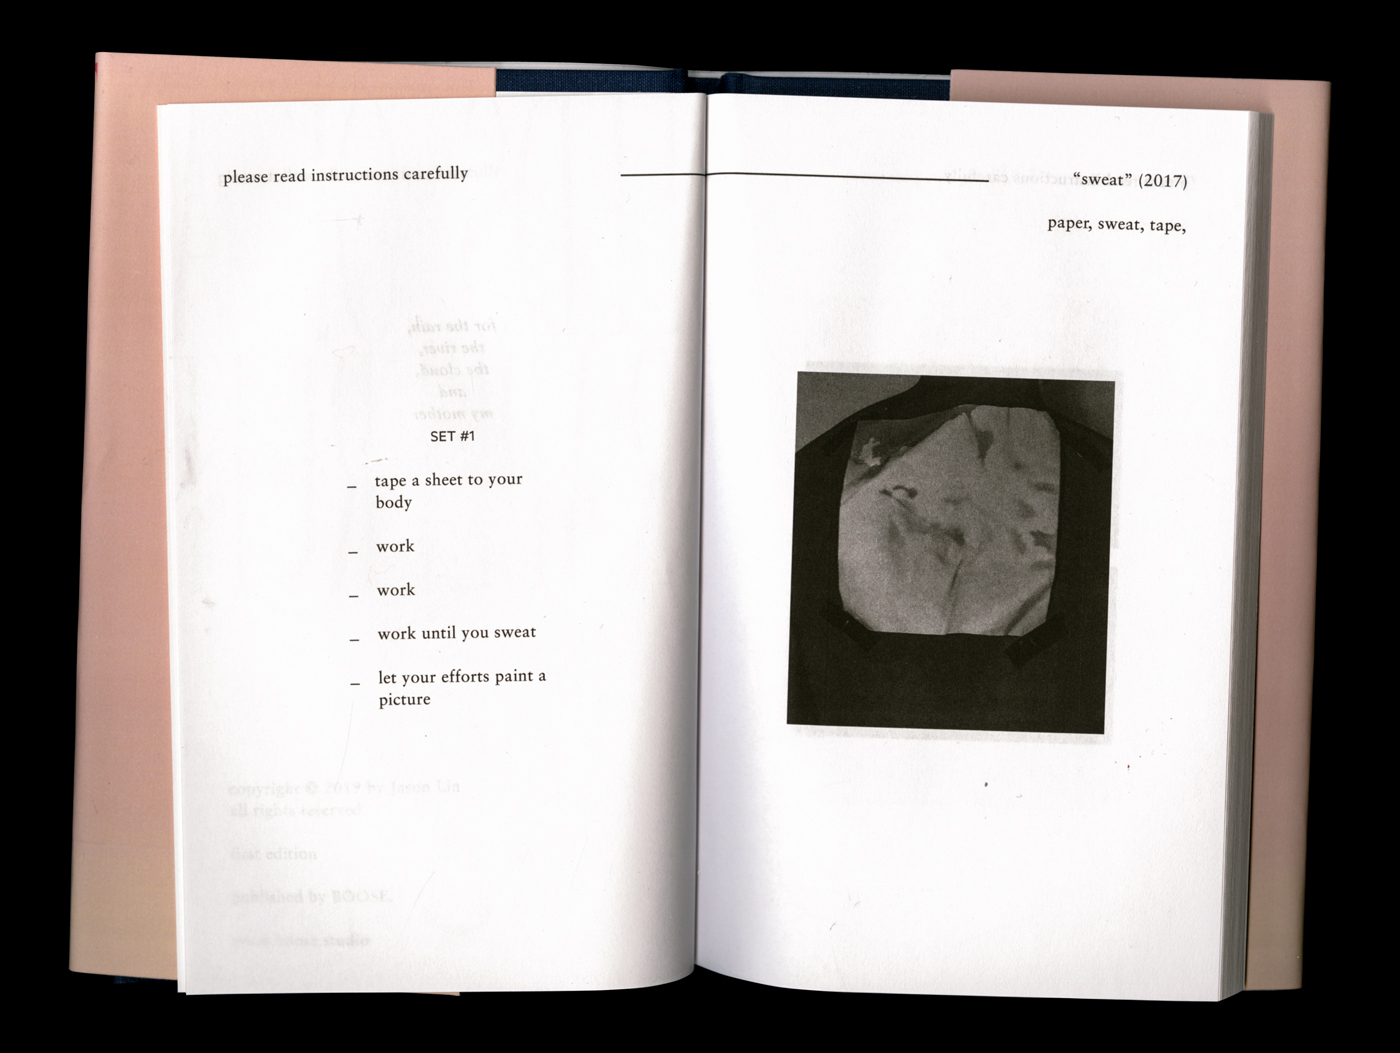 interior of the book "Seeds of a Grapefruit" with an image of a piece of paper taped to a person